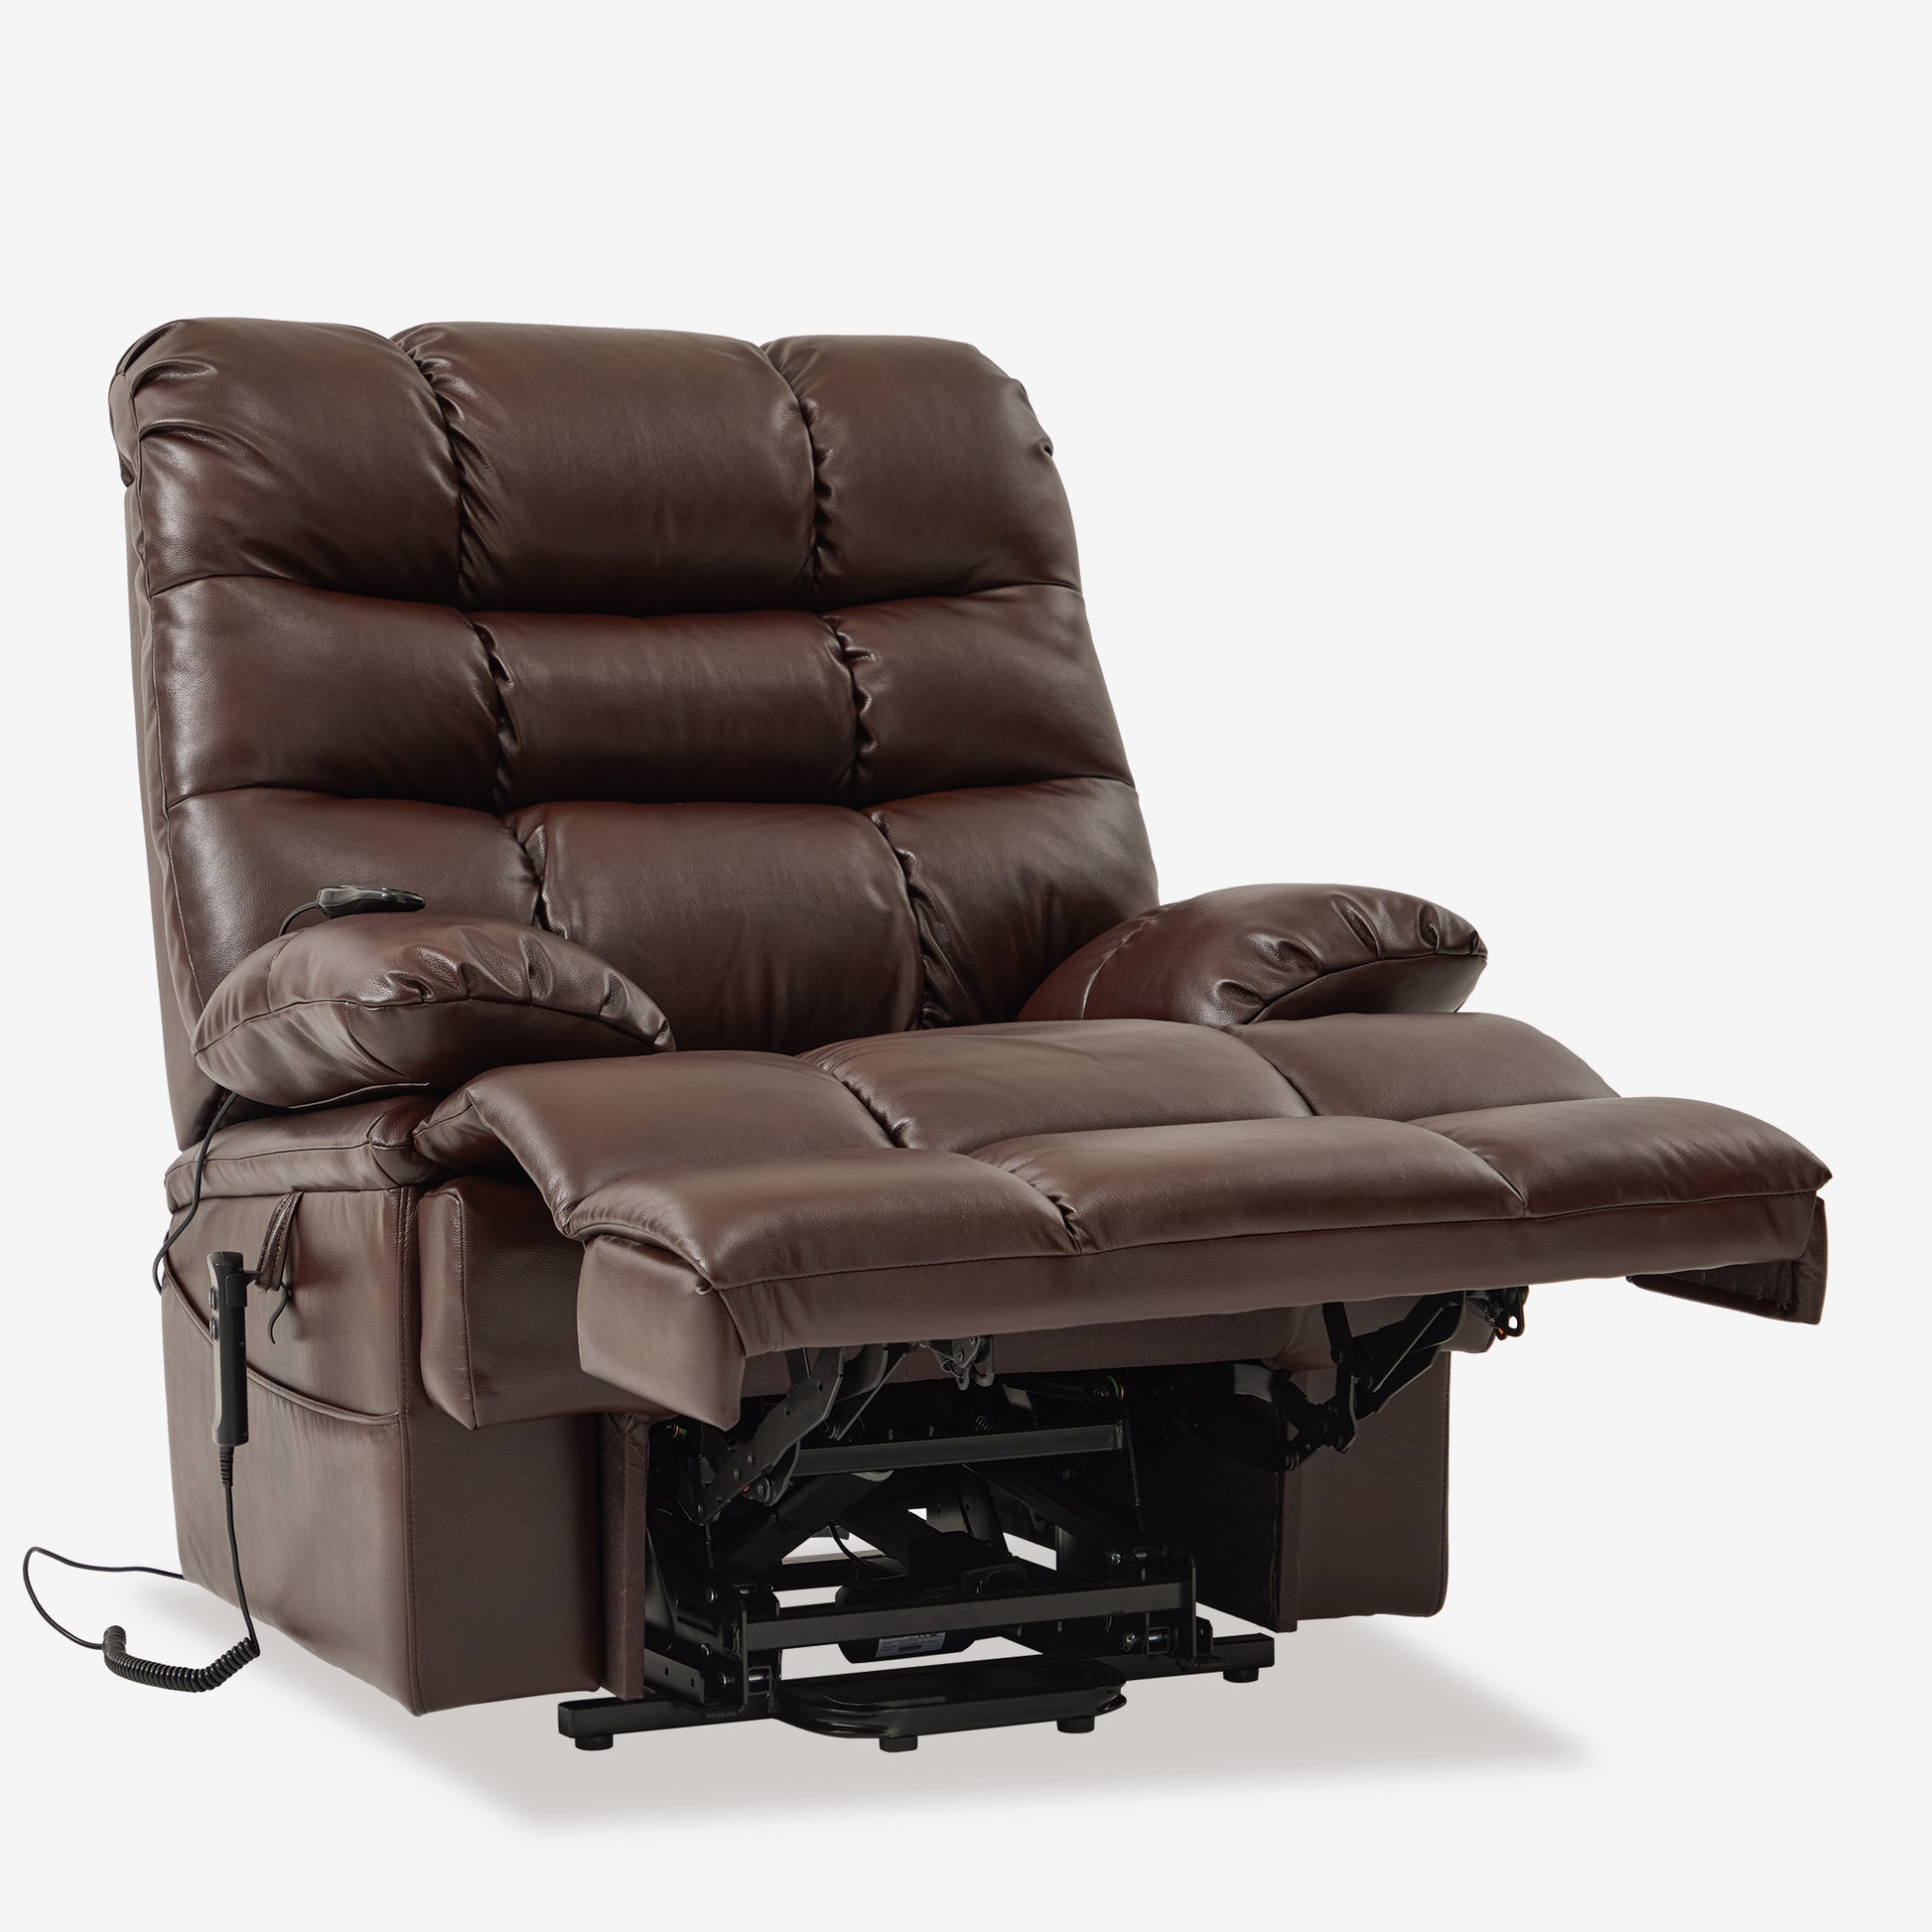 Big Man Recliners With 400-lb Weight Capacity and Heating Massage